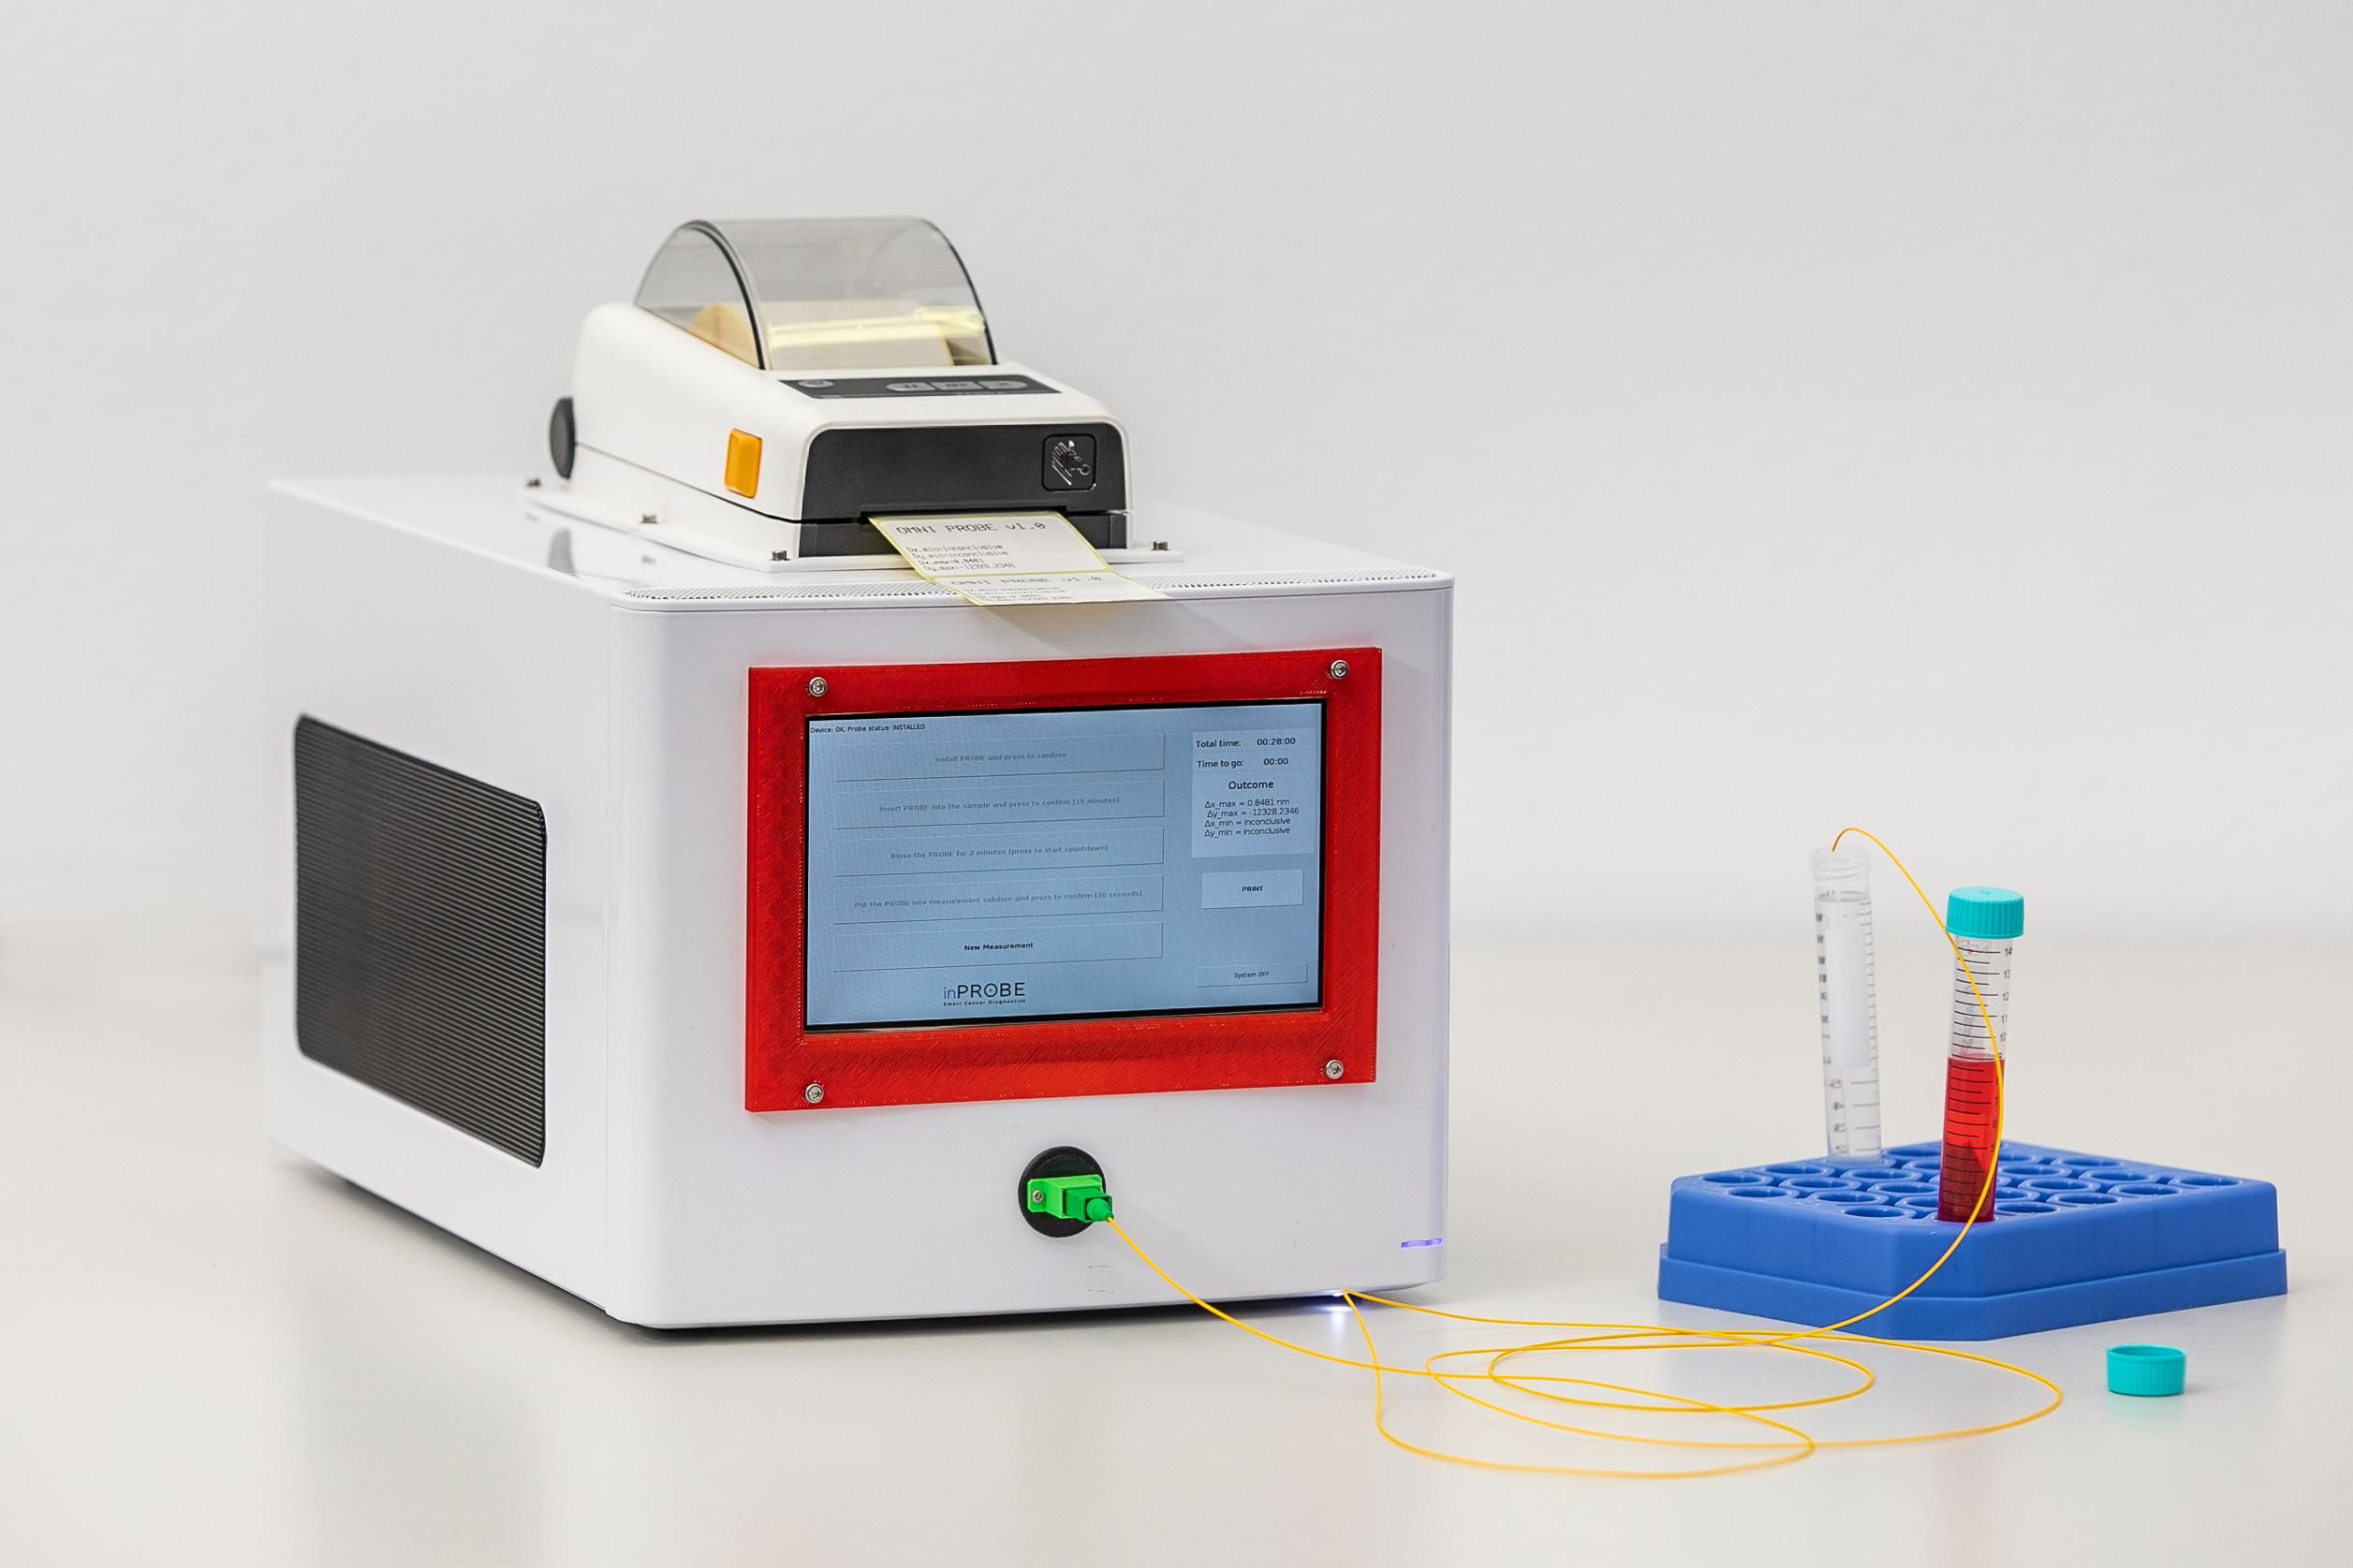 Diagnostic device in the shape of a white box in a metal case, with a screen and the possibility of printing the results. The device is connected to the test tube with thin wires.